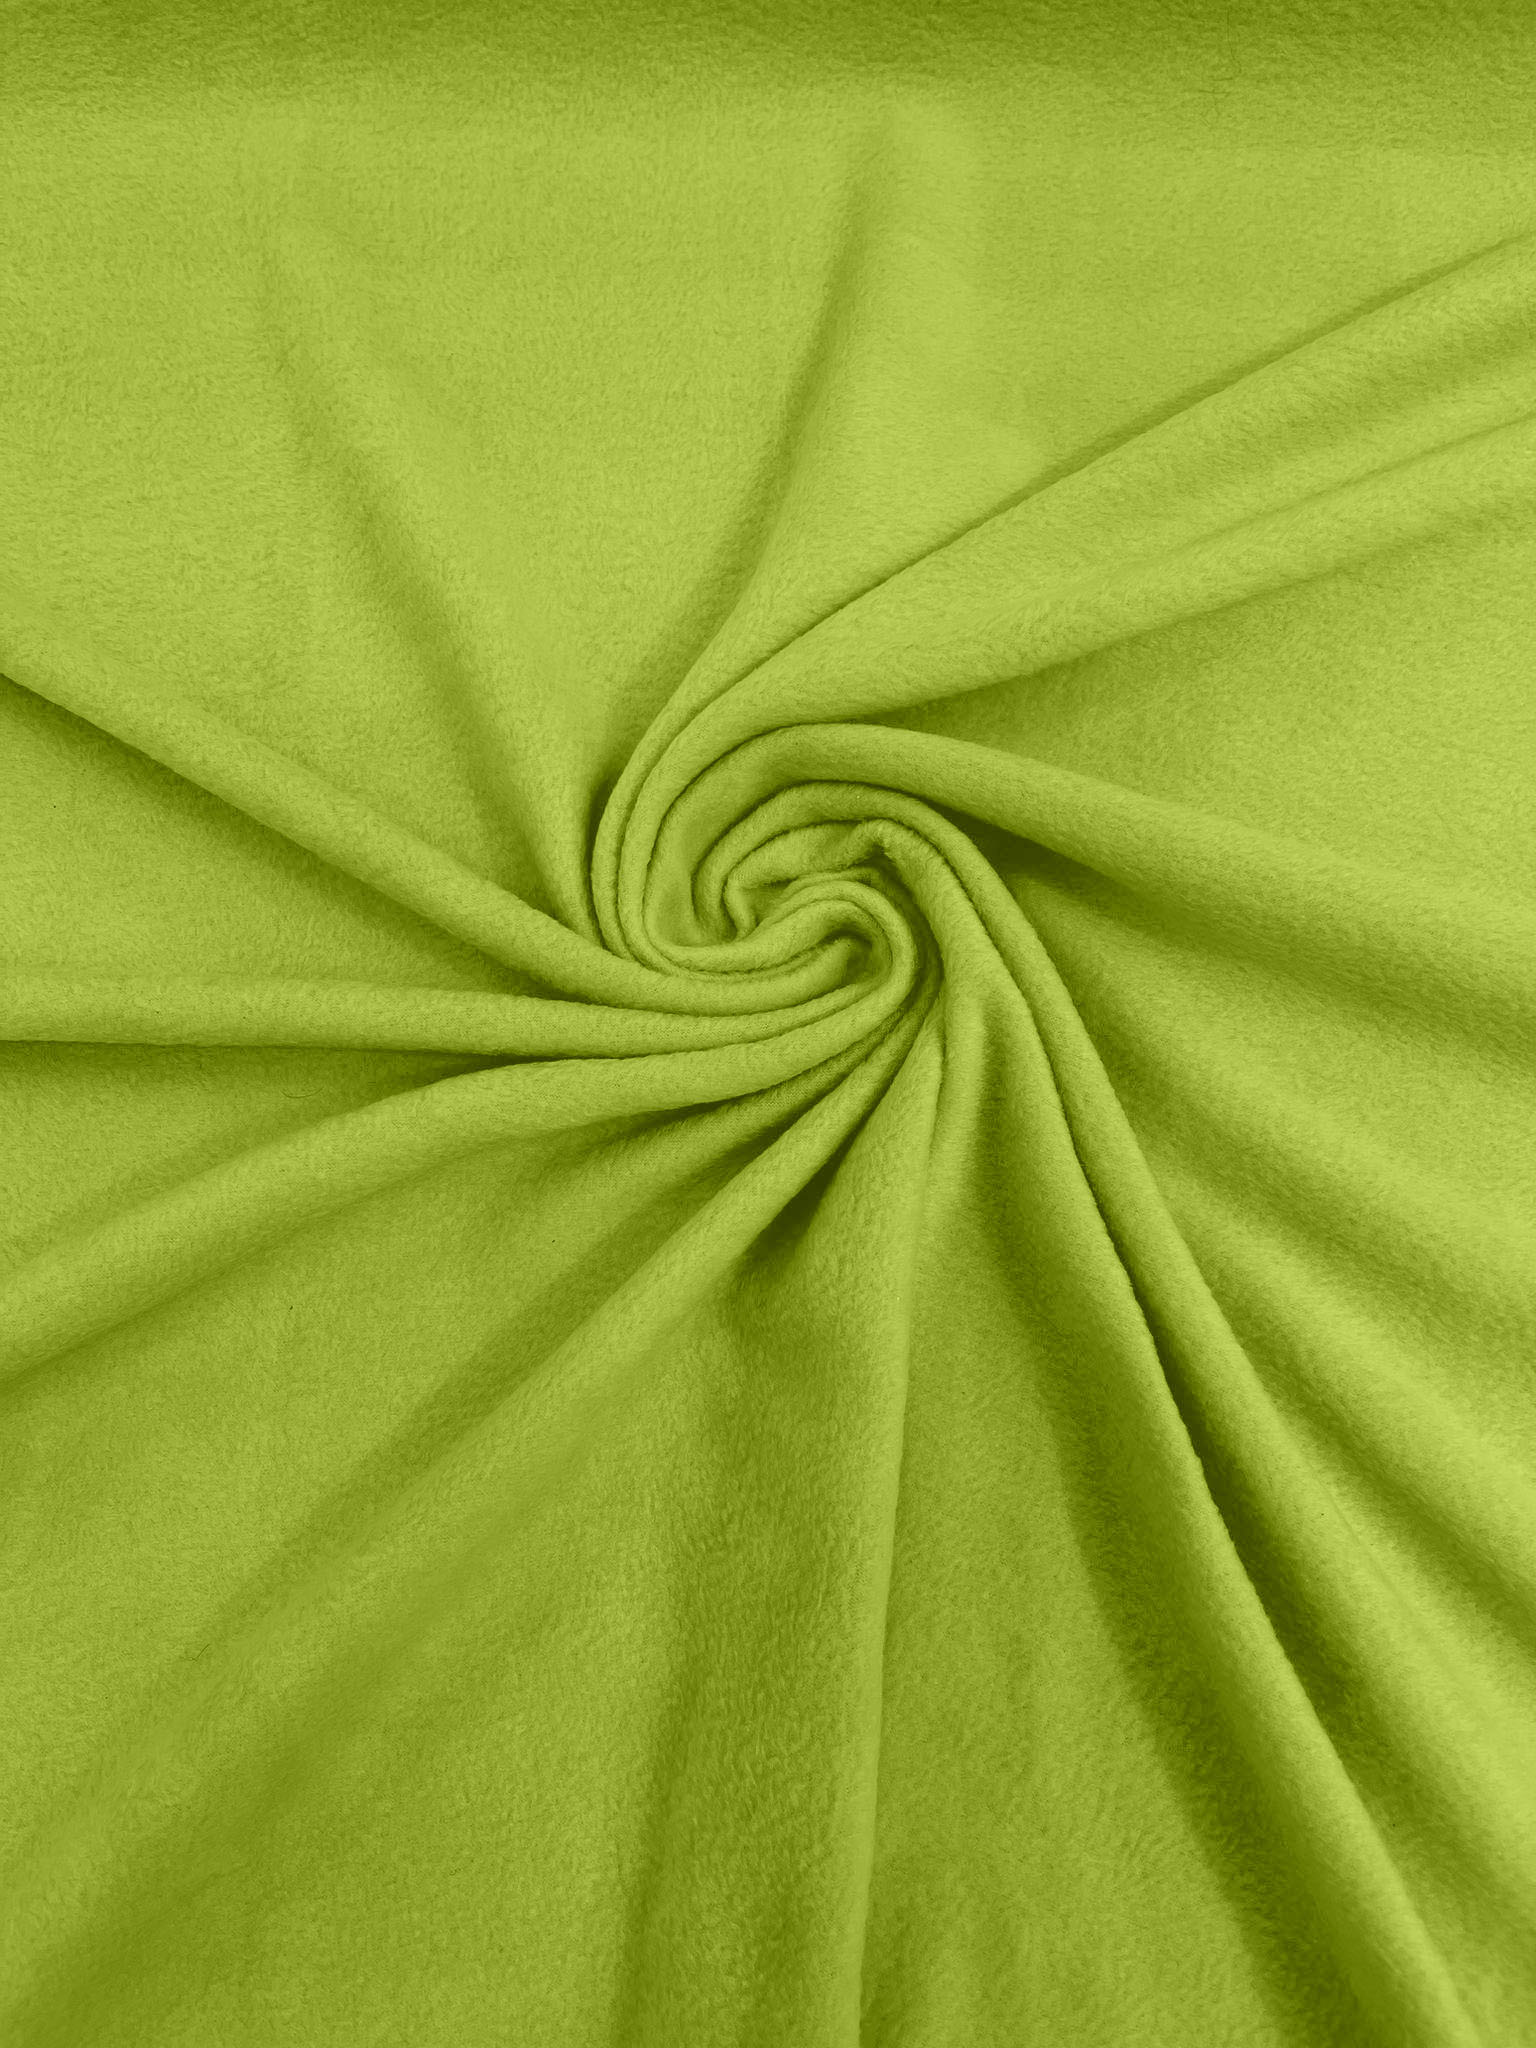 Neon Green Solid Polar Fleece Fabric Anti-Pill 58" Wide Sold by The Yard